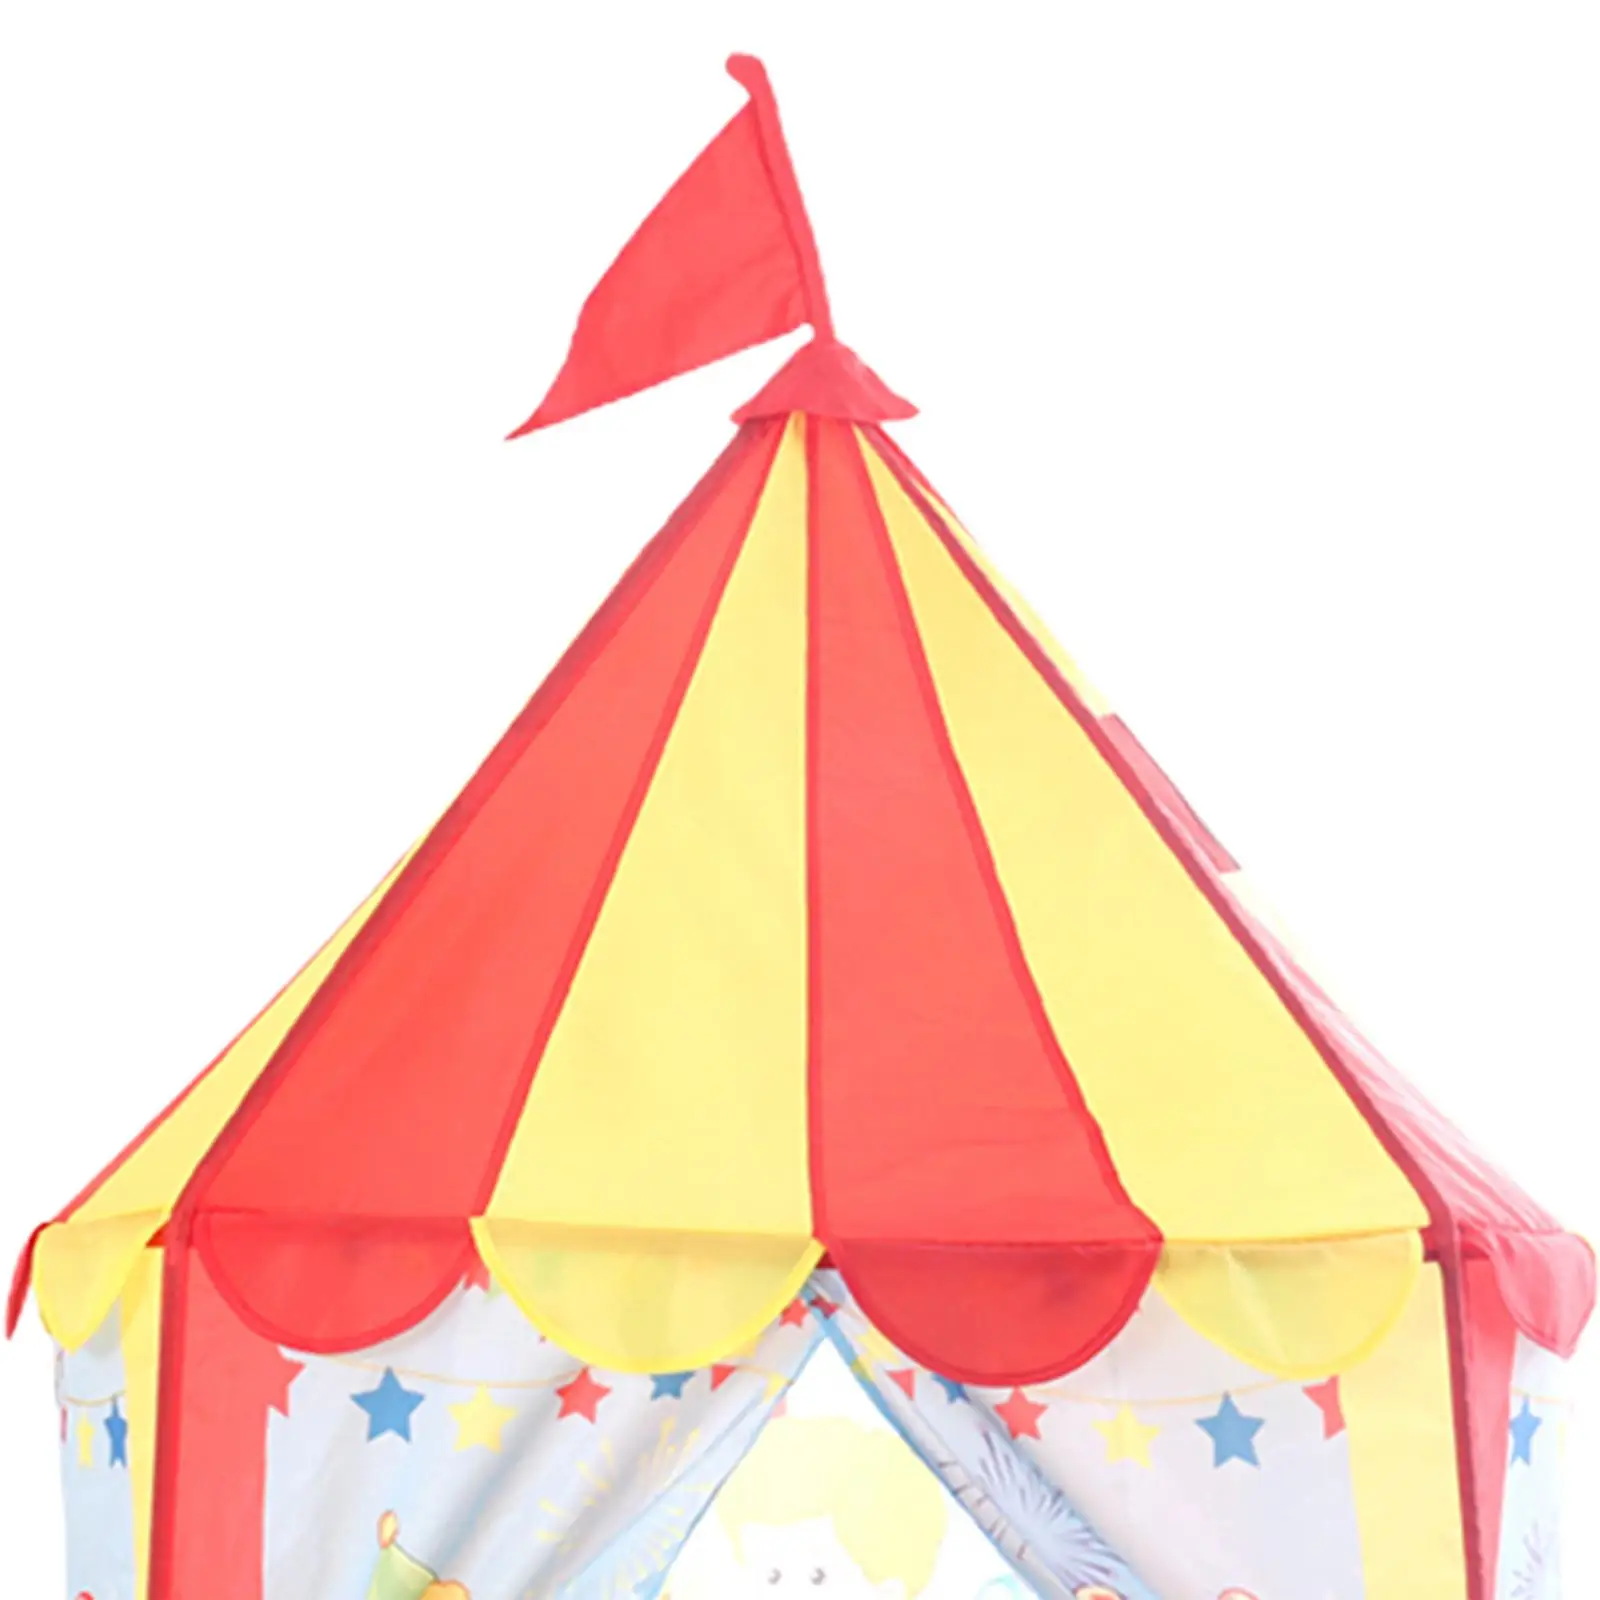 Princess Castle Playhouse Tent Play Tent for Boys Girls, Easy to Assemble, Play Teepee for Yard